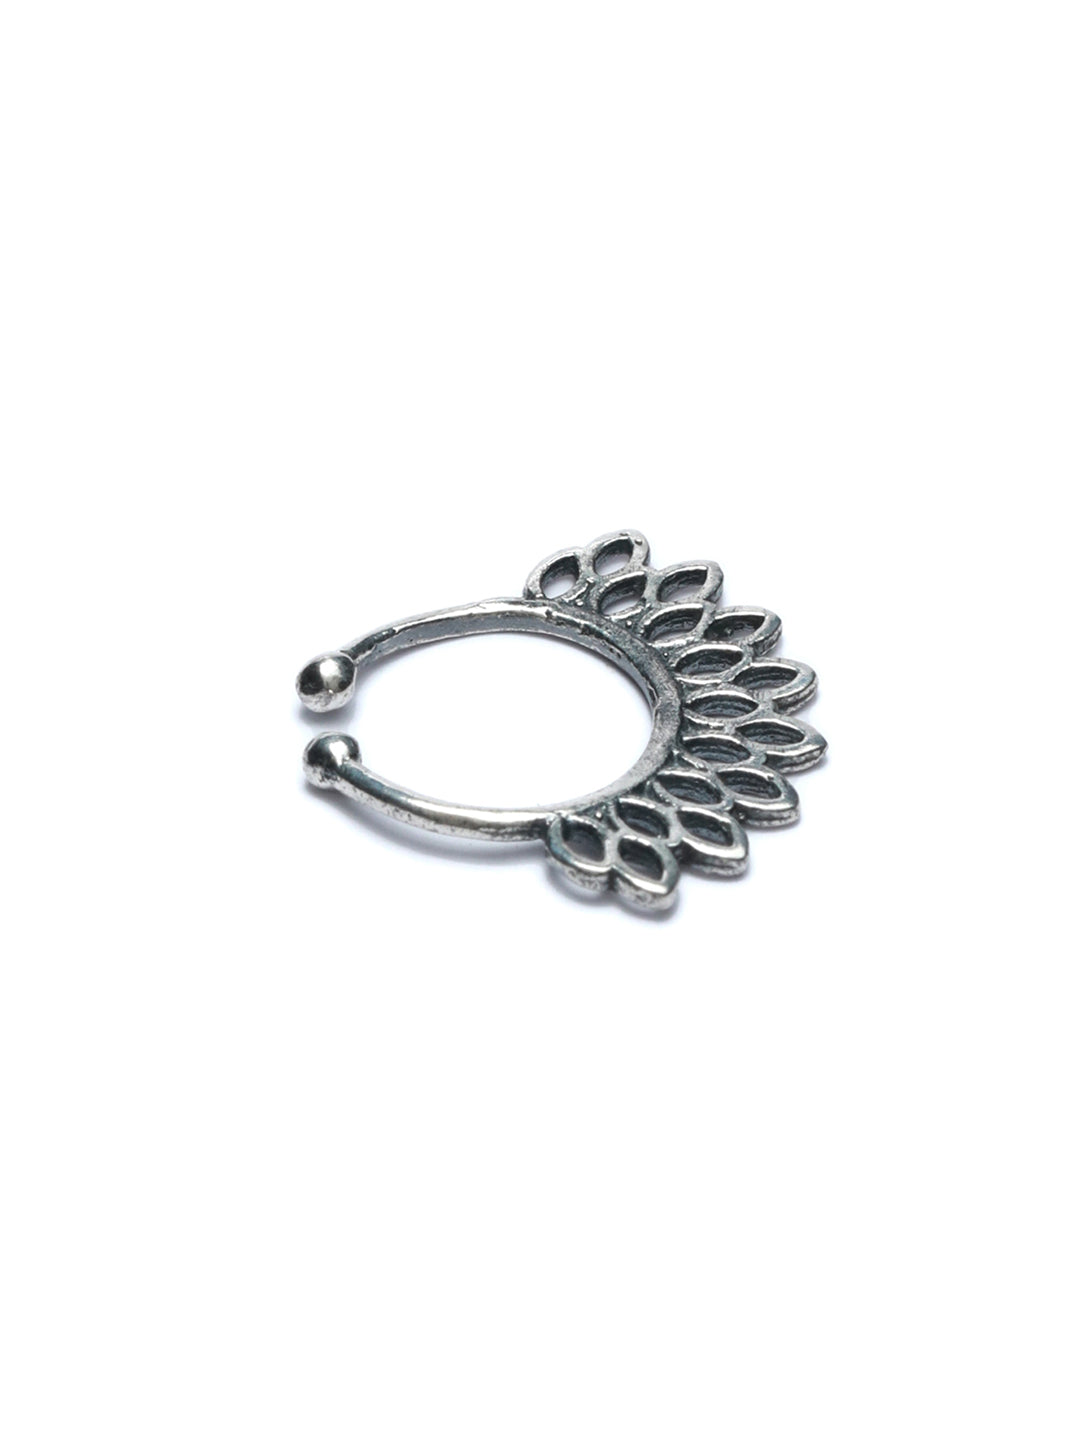 Oxidised Silver Tribal Septum Nose Ring